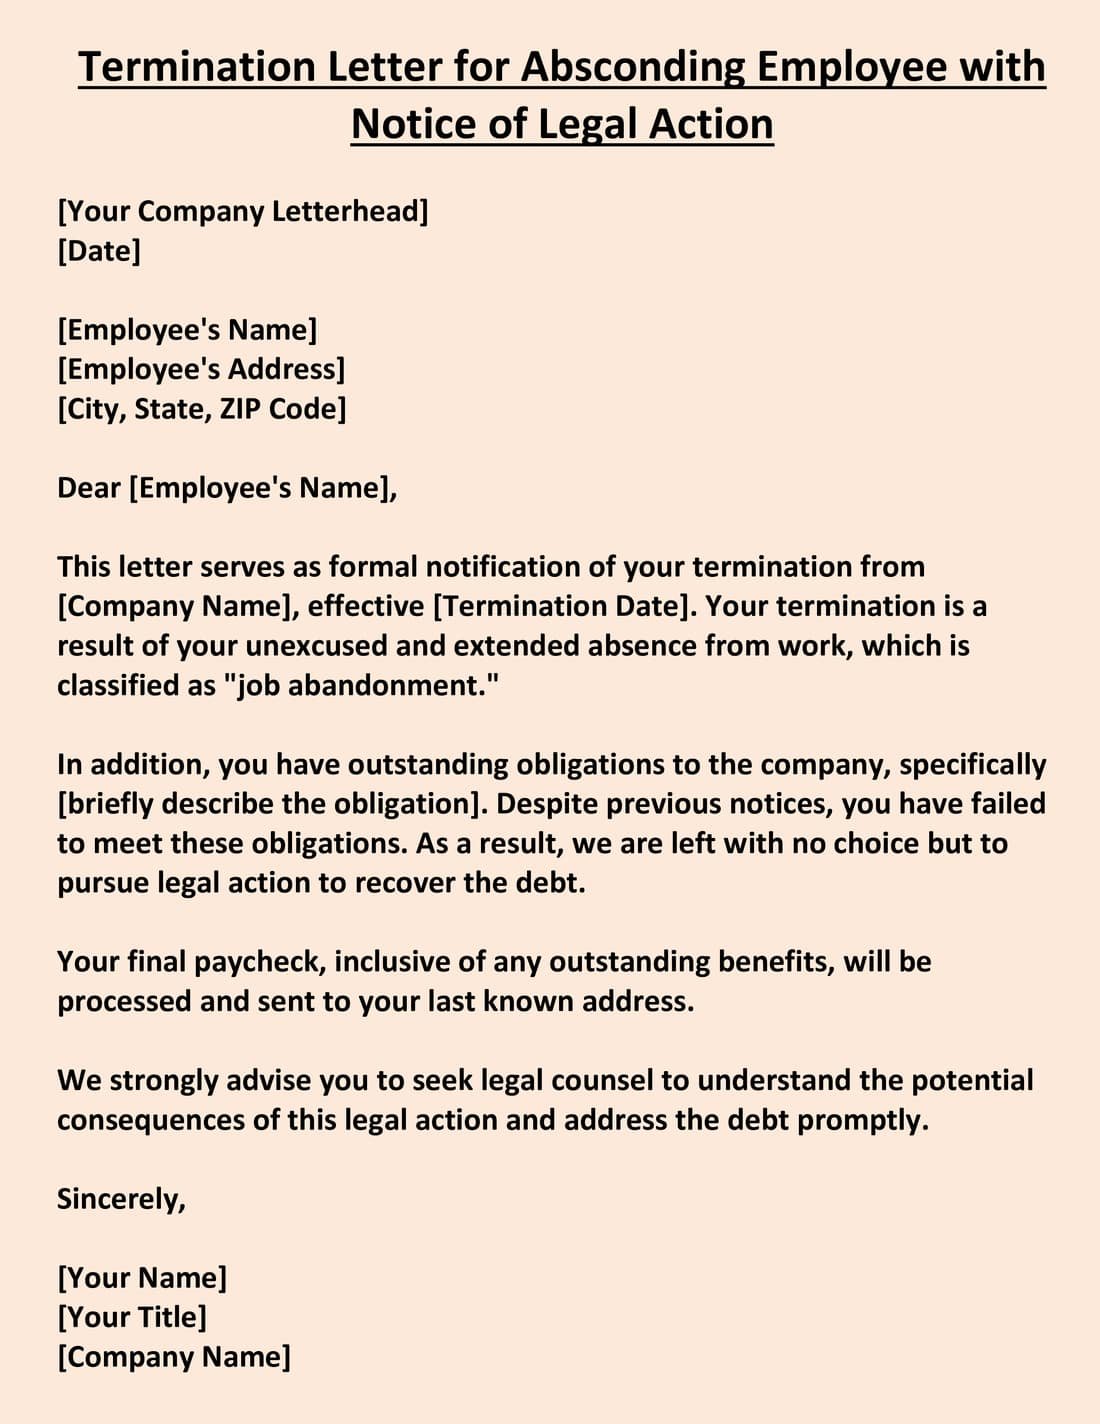 Termination Letter for Absconding Employee with Notice of Legal Action